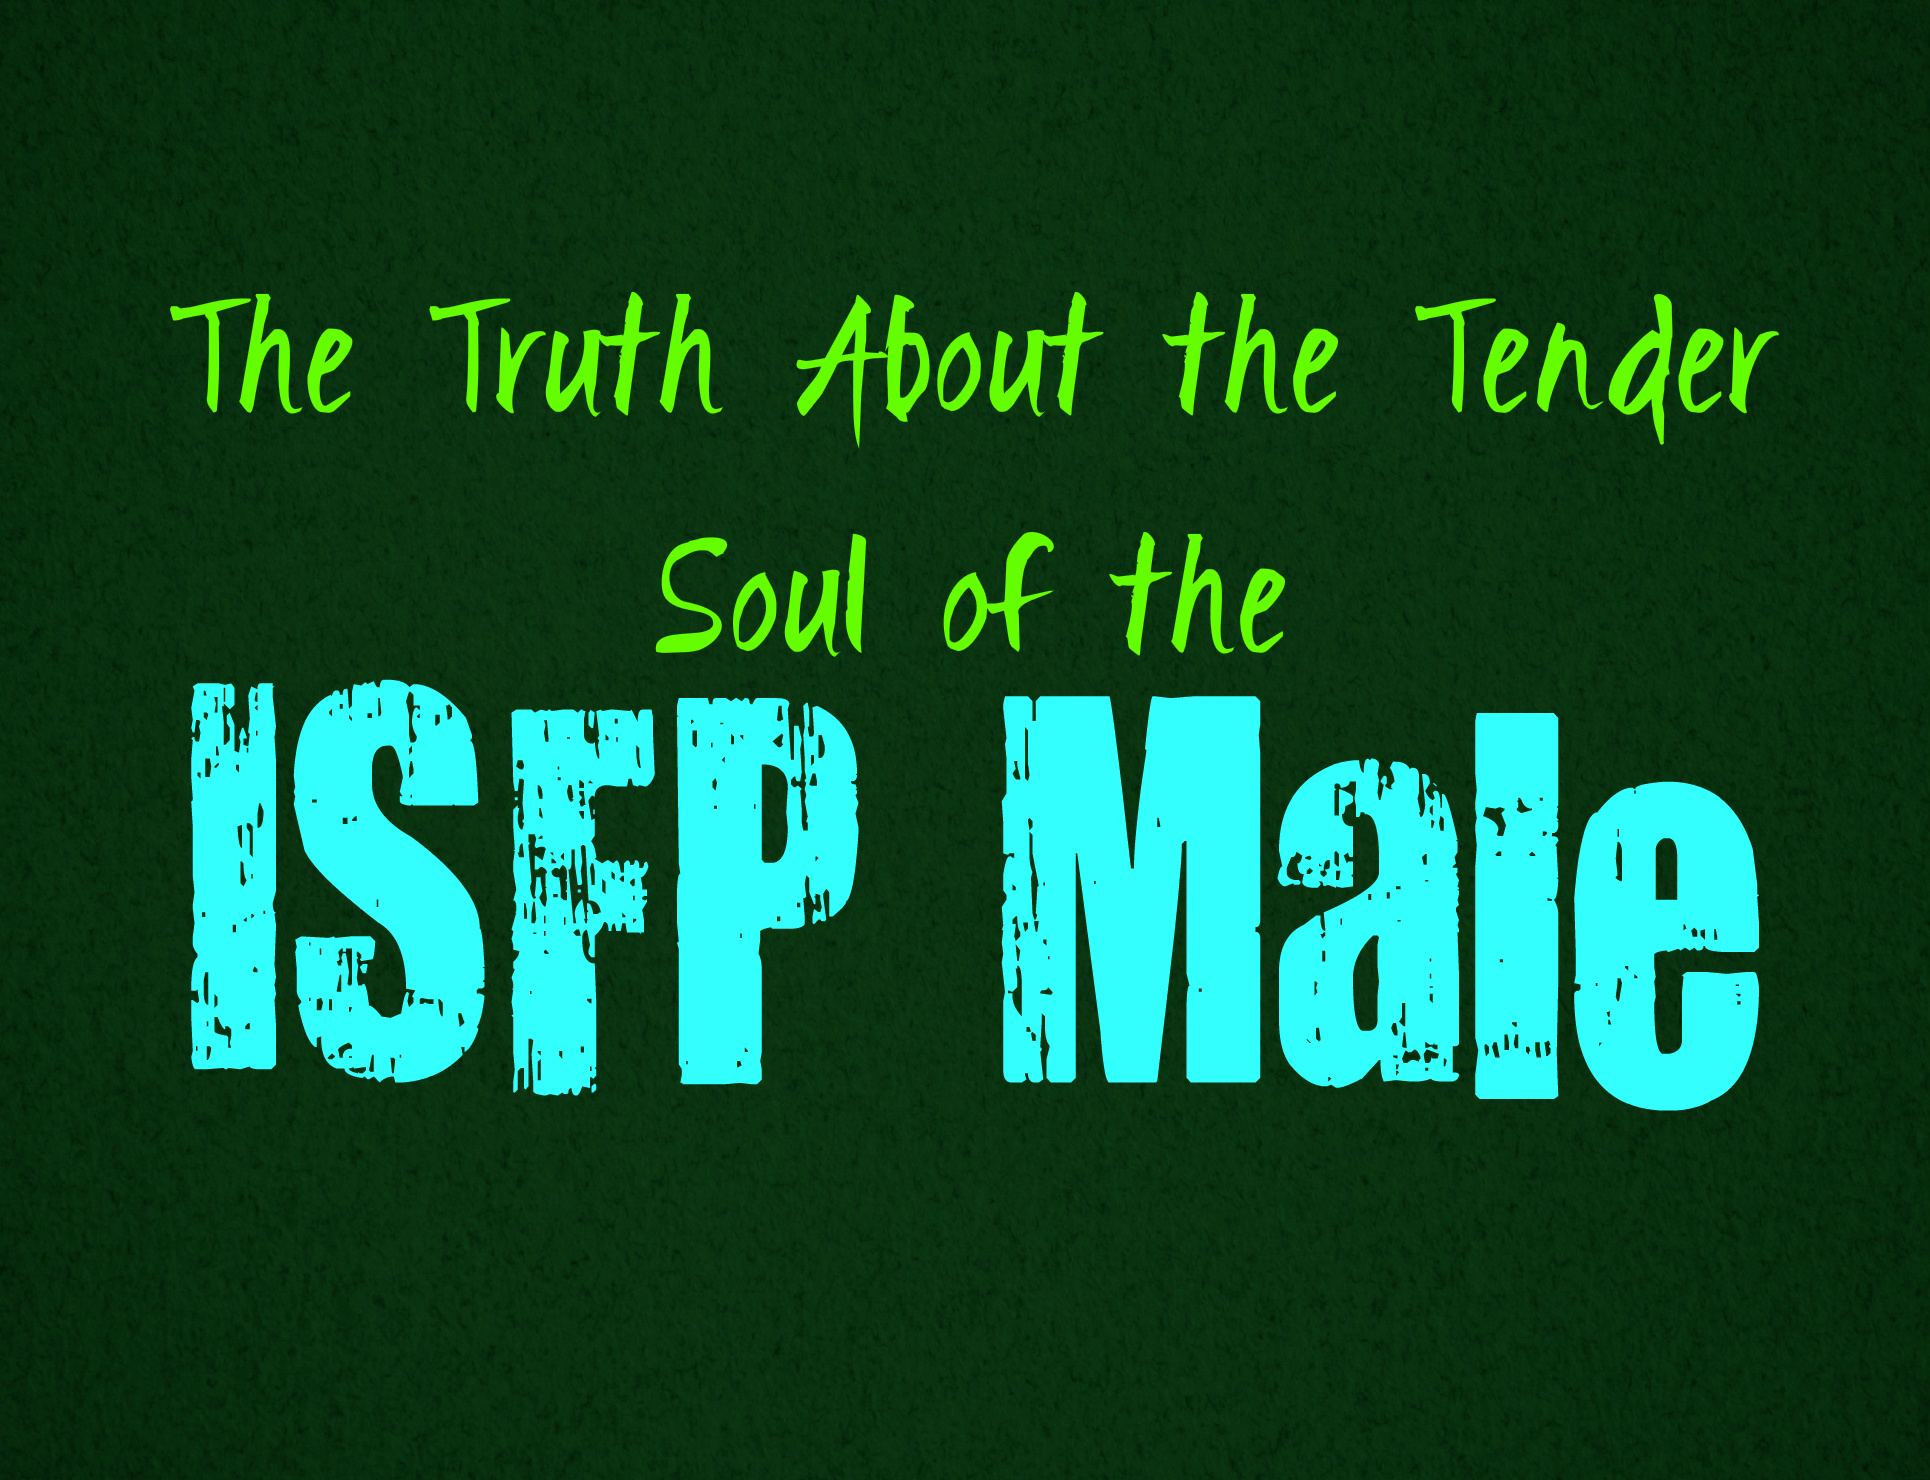 Do isfp care about looks?